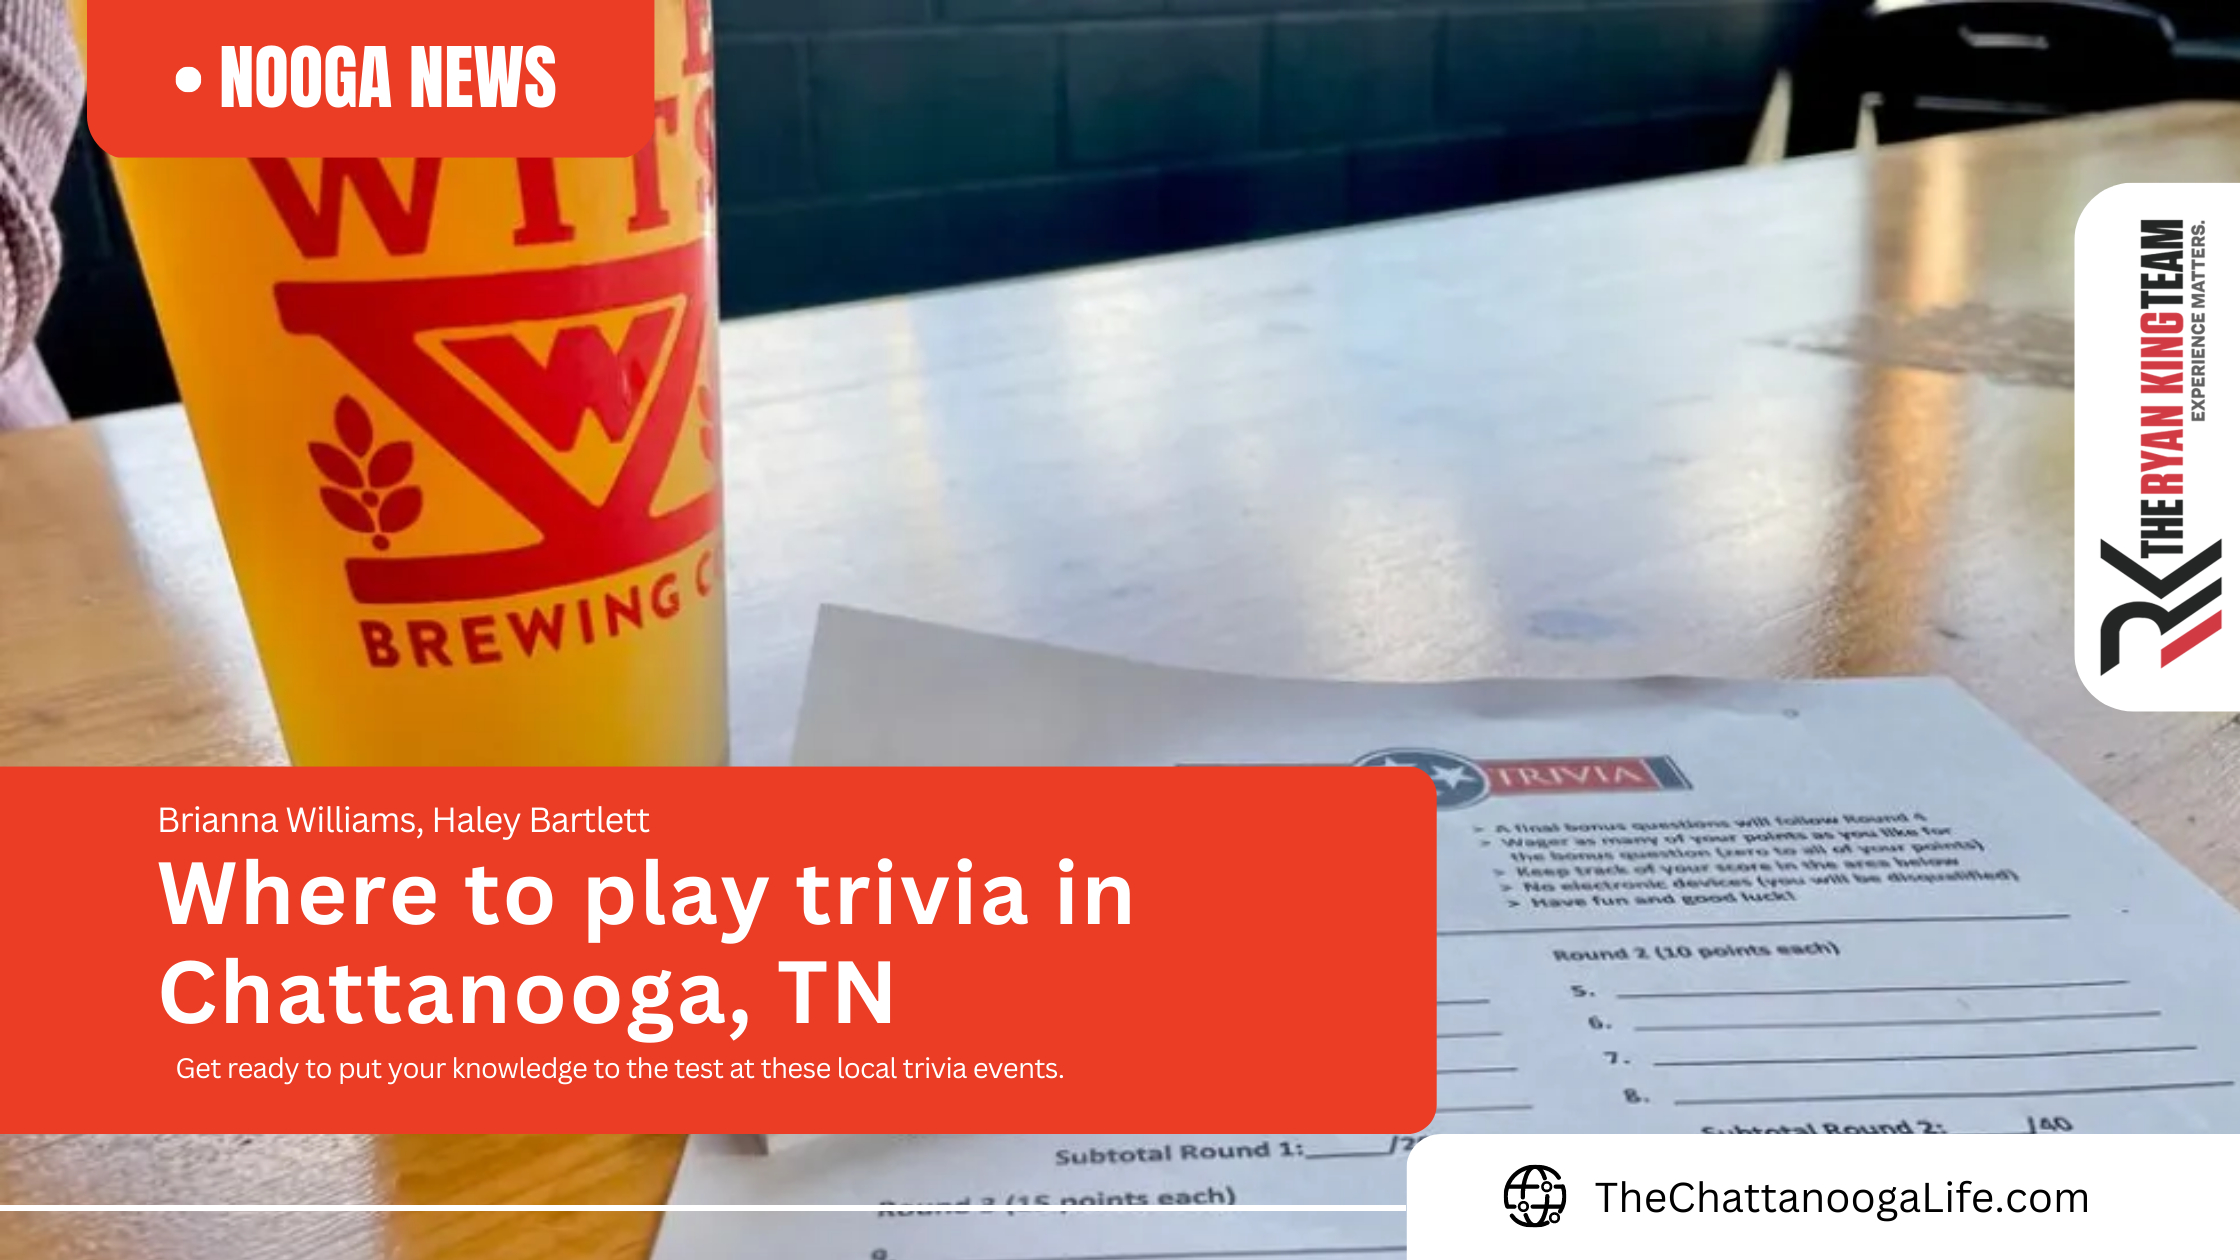 Where to play trivia in Chattanooga, TN